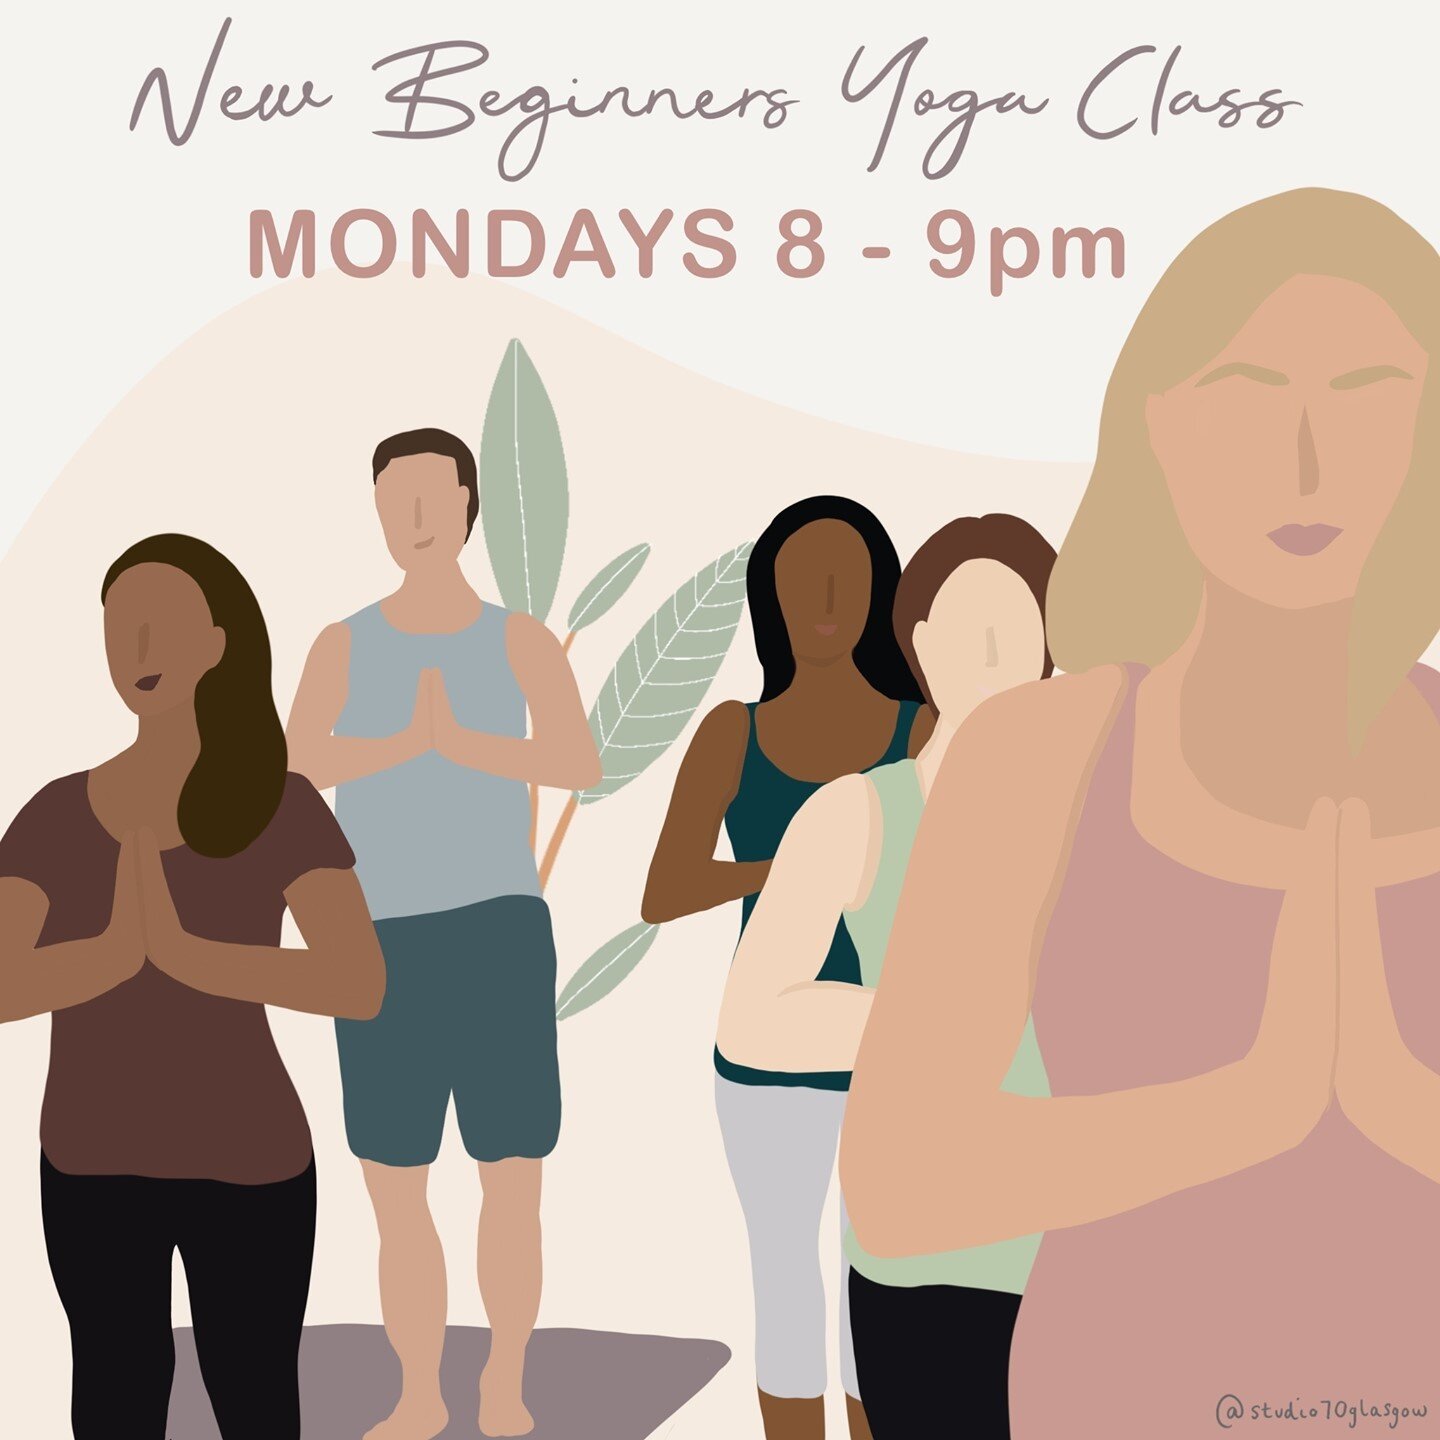 ✨NEW CLASS ALERT✨⁠
⁠
We launched a new beginner's yoga class a few weeks ago and it has been hugely popular. ⁠
⁠
One of the best ways to ease yourself into yoga if you are new is with a course.  This allows us to build upon your knowledge each week s